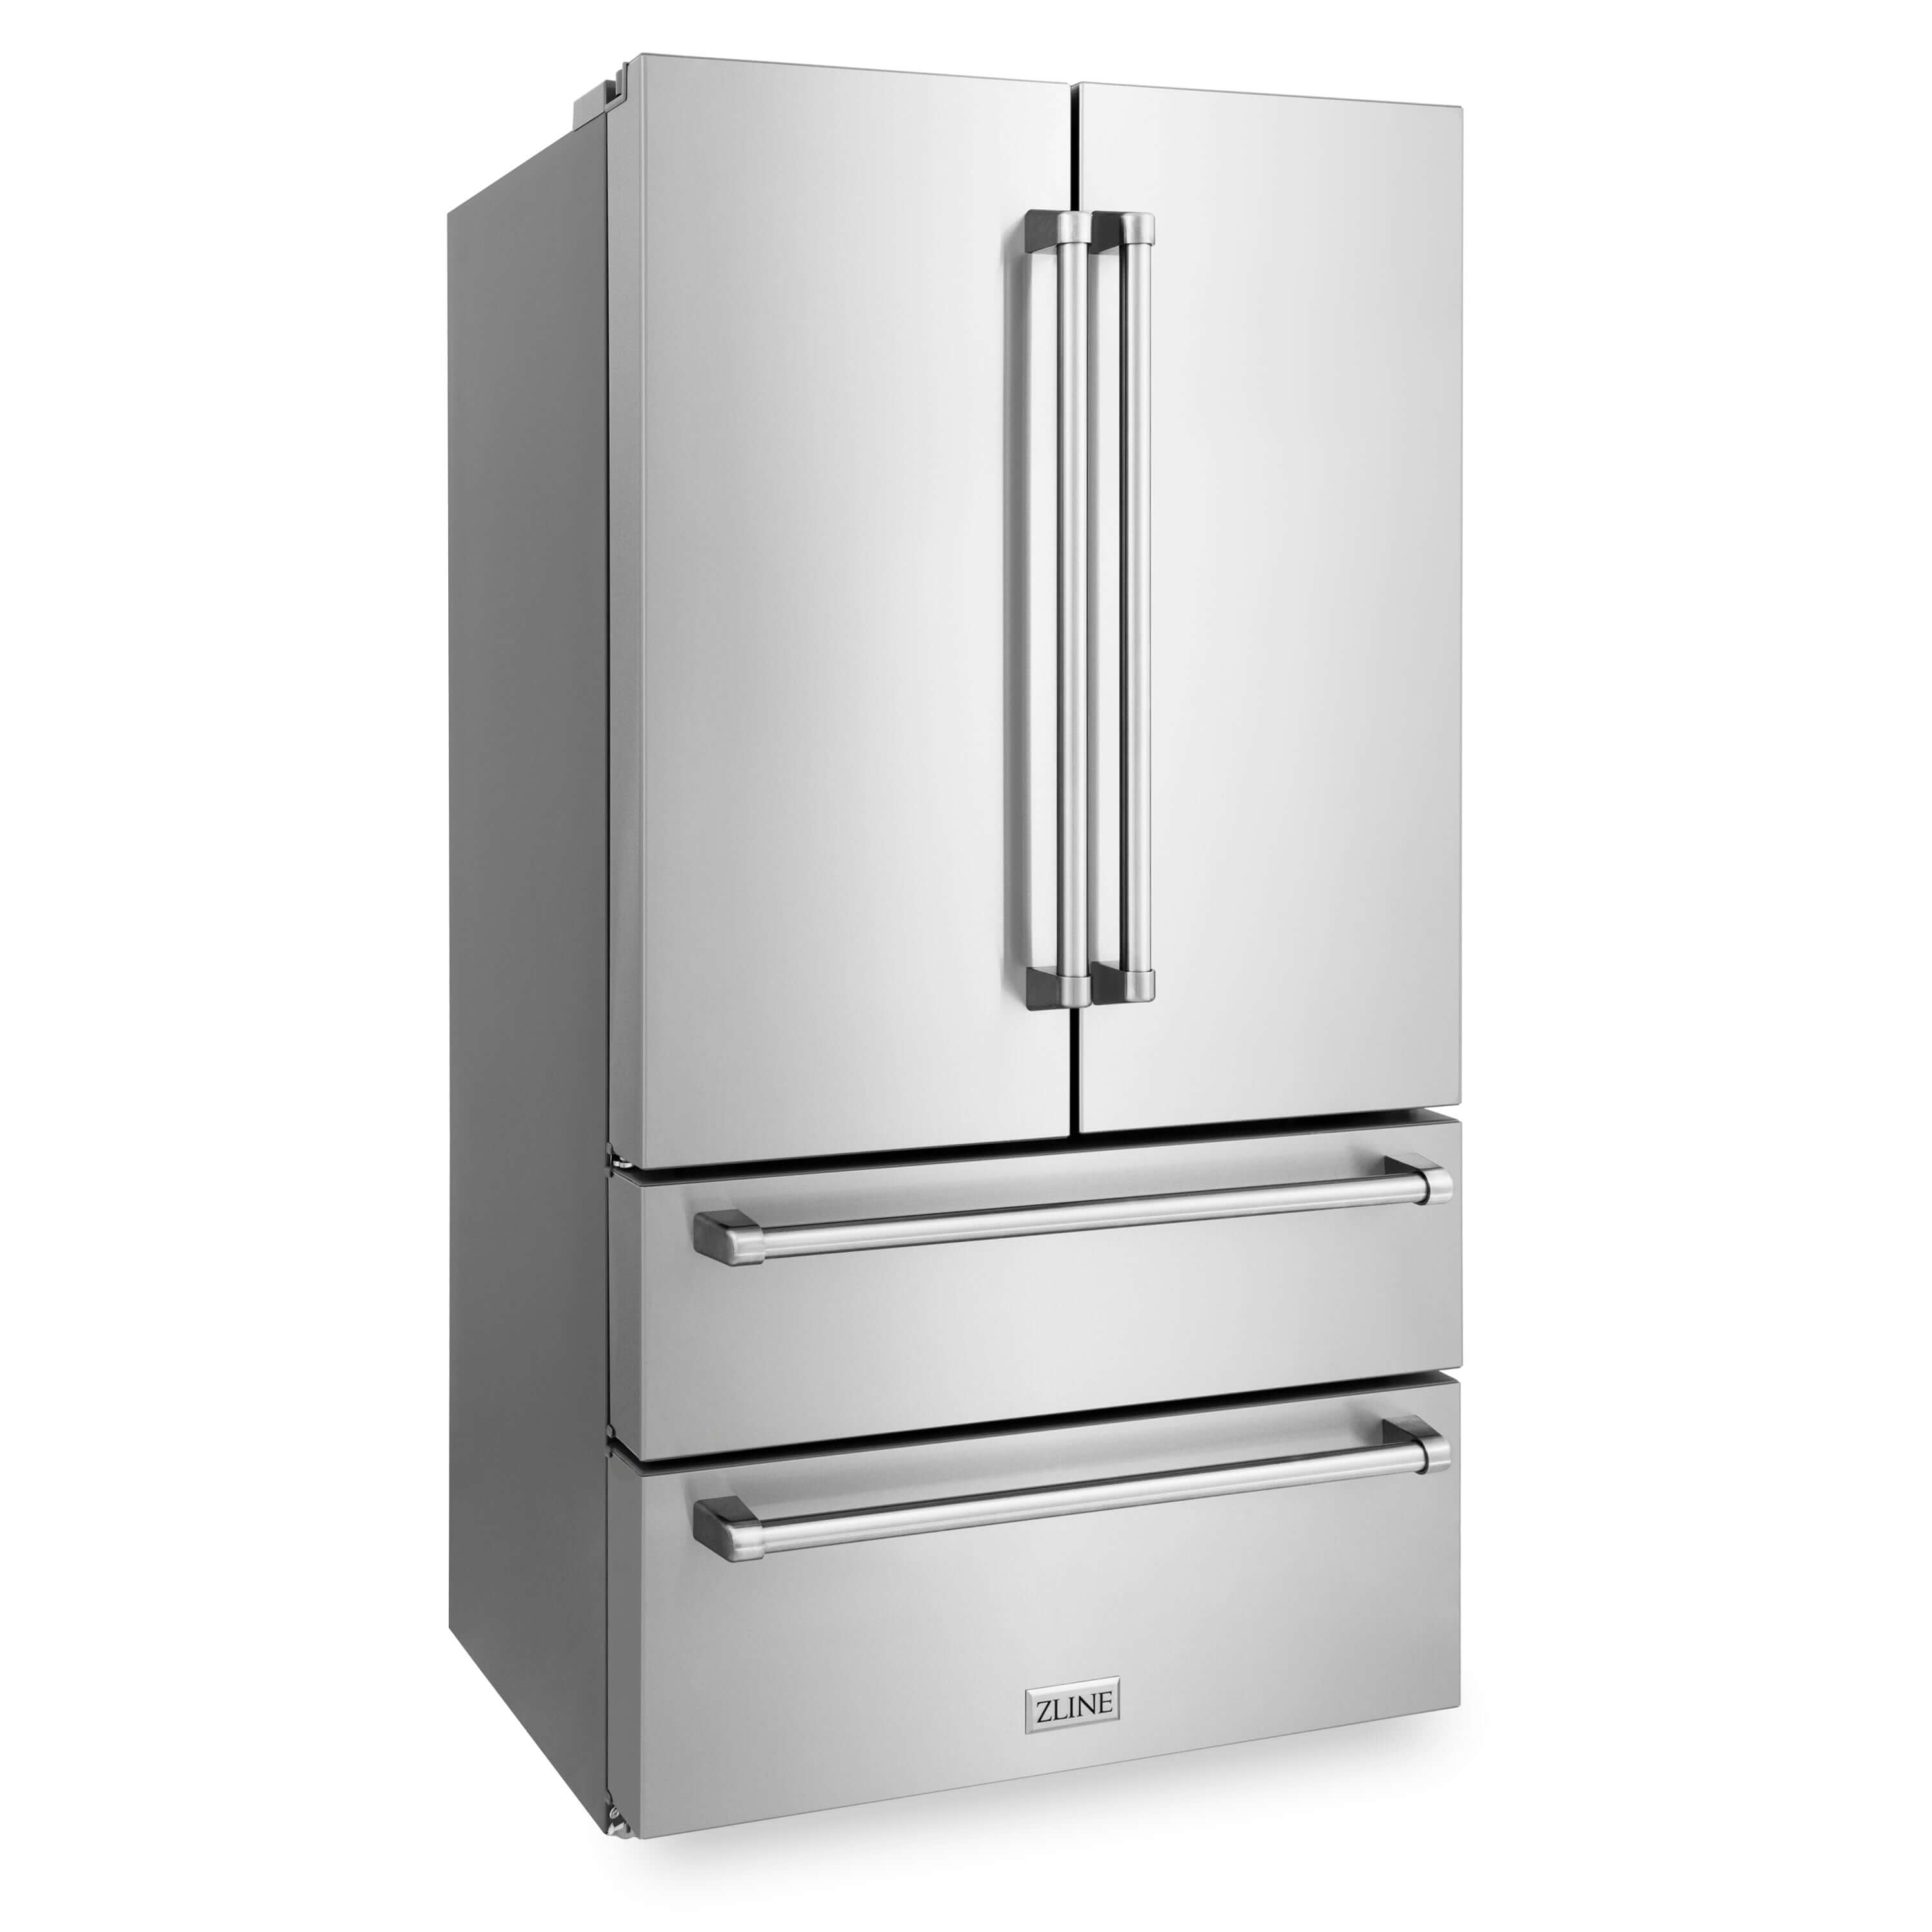 ZLINE Kitchen Package in Stainless Steel with 36 in. French Door Refrigerator, 48 in. Rangetop, 48 in. Range Hood, 30 in. Double Wall Oven and 24 in. Tall Tub Dishwasher (5KPR-RTRH48-AWDDWV)